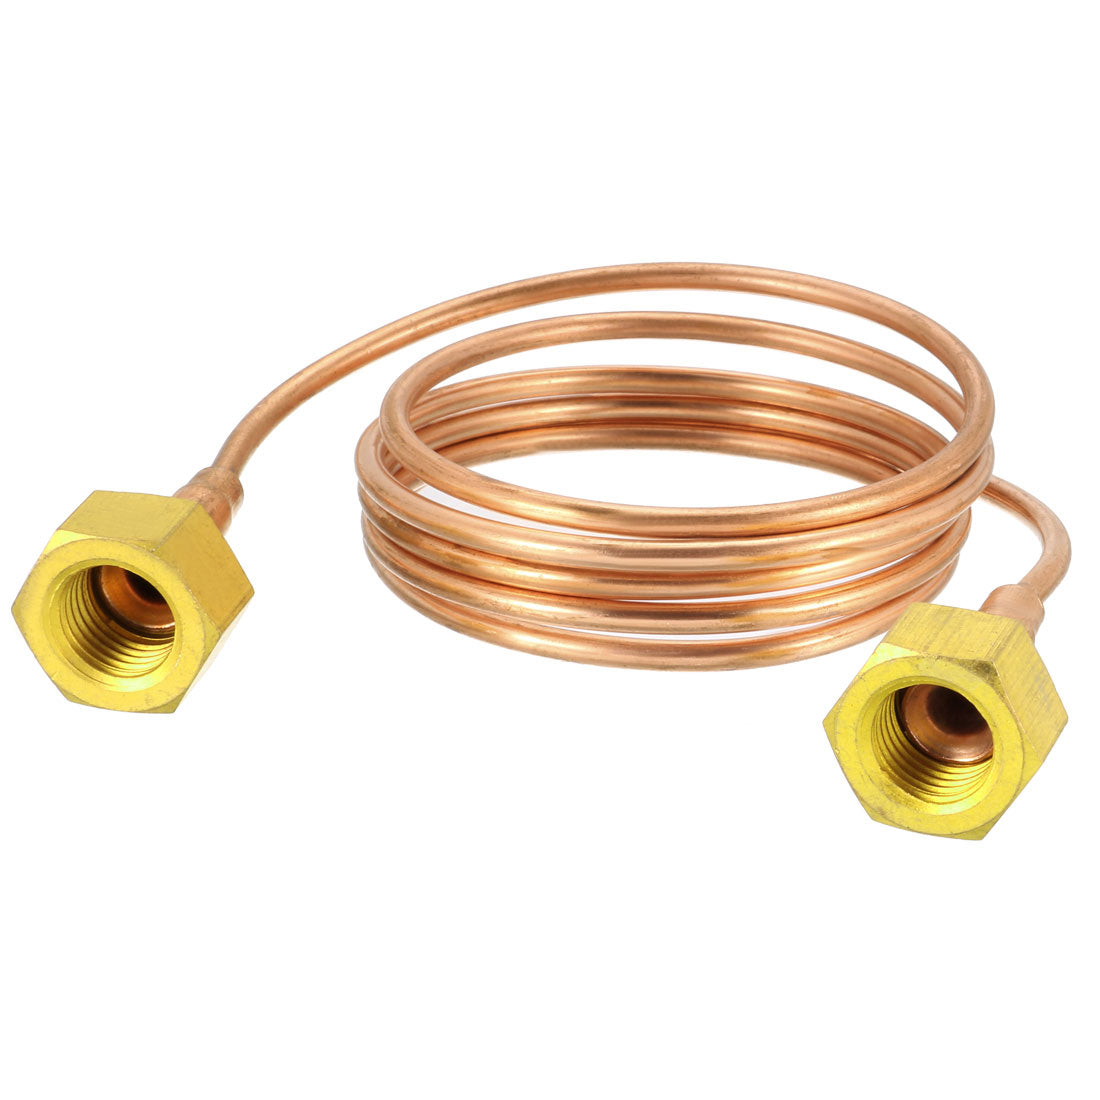 uxcell Uxcell Refrigeration Tubing 1/8" OD 5/64" ID Copper Tubing Coil with Short Flared Nuts